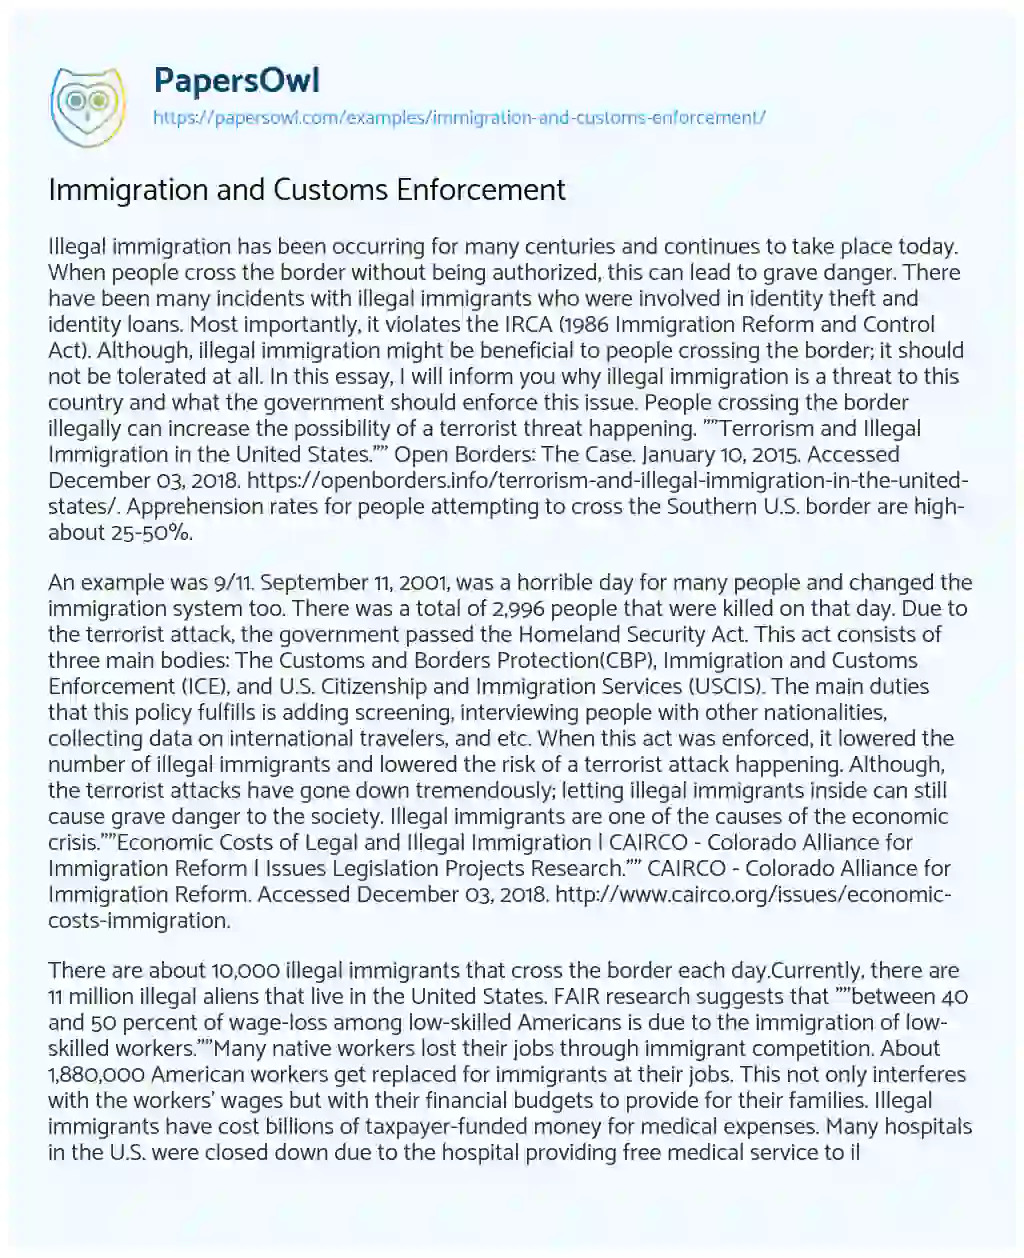 Essay on Immigration and Customs Enforcement